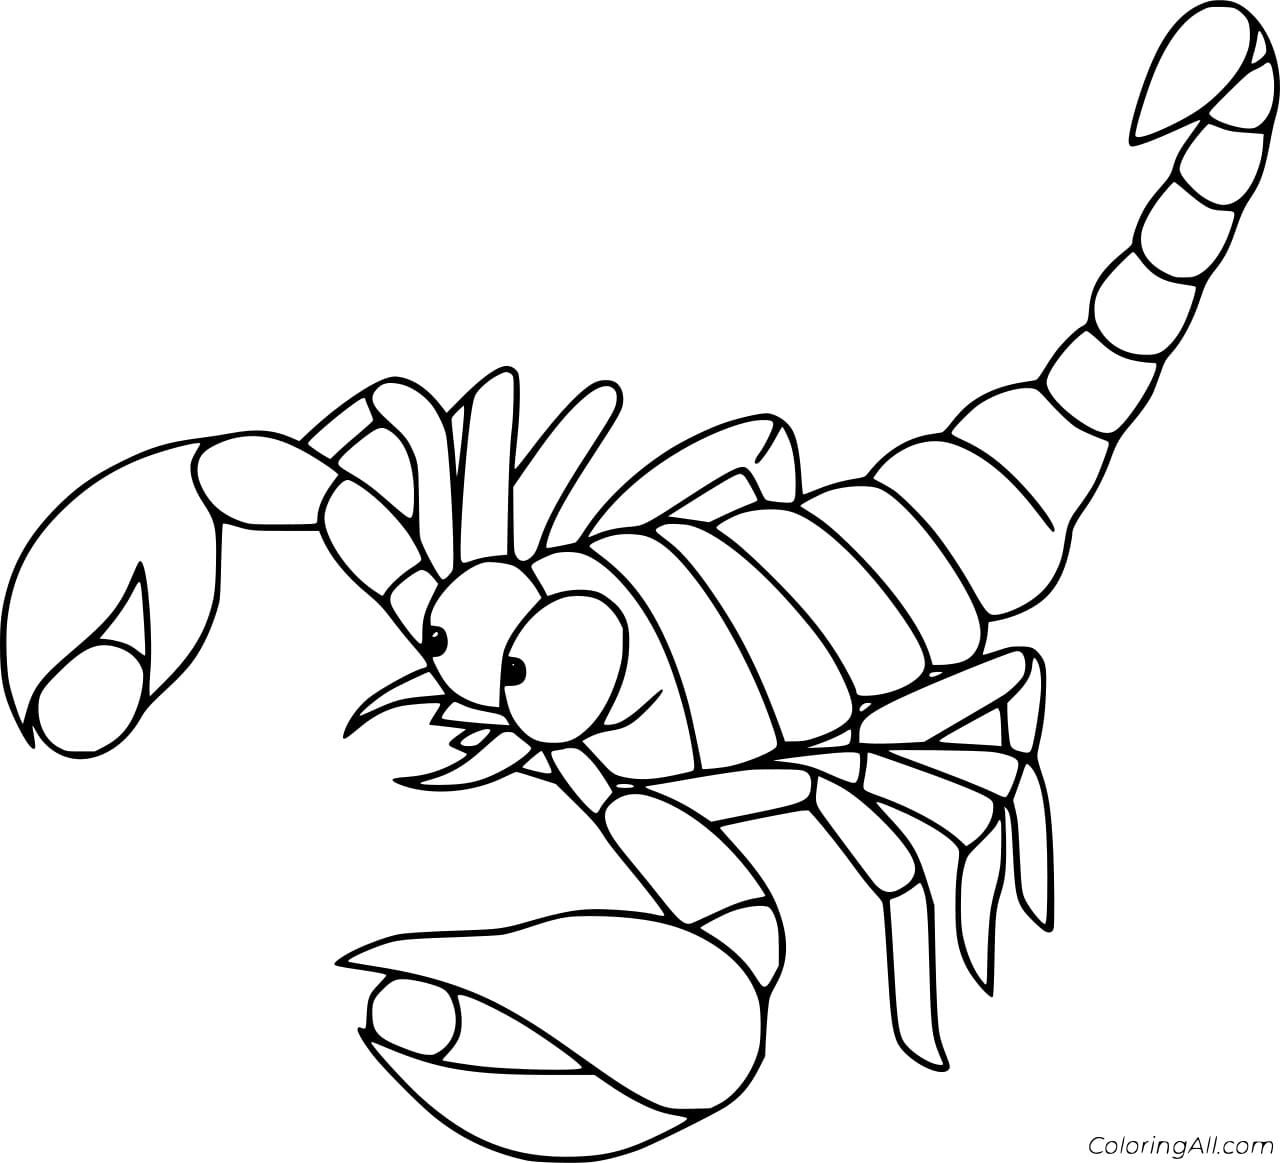 Cartoon Funny Scorpion Free Printable Coloring Page